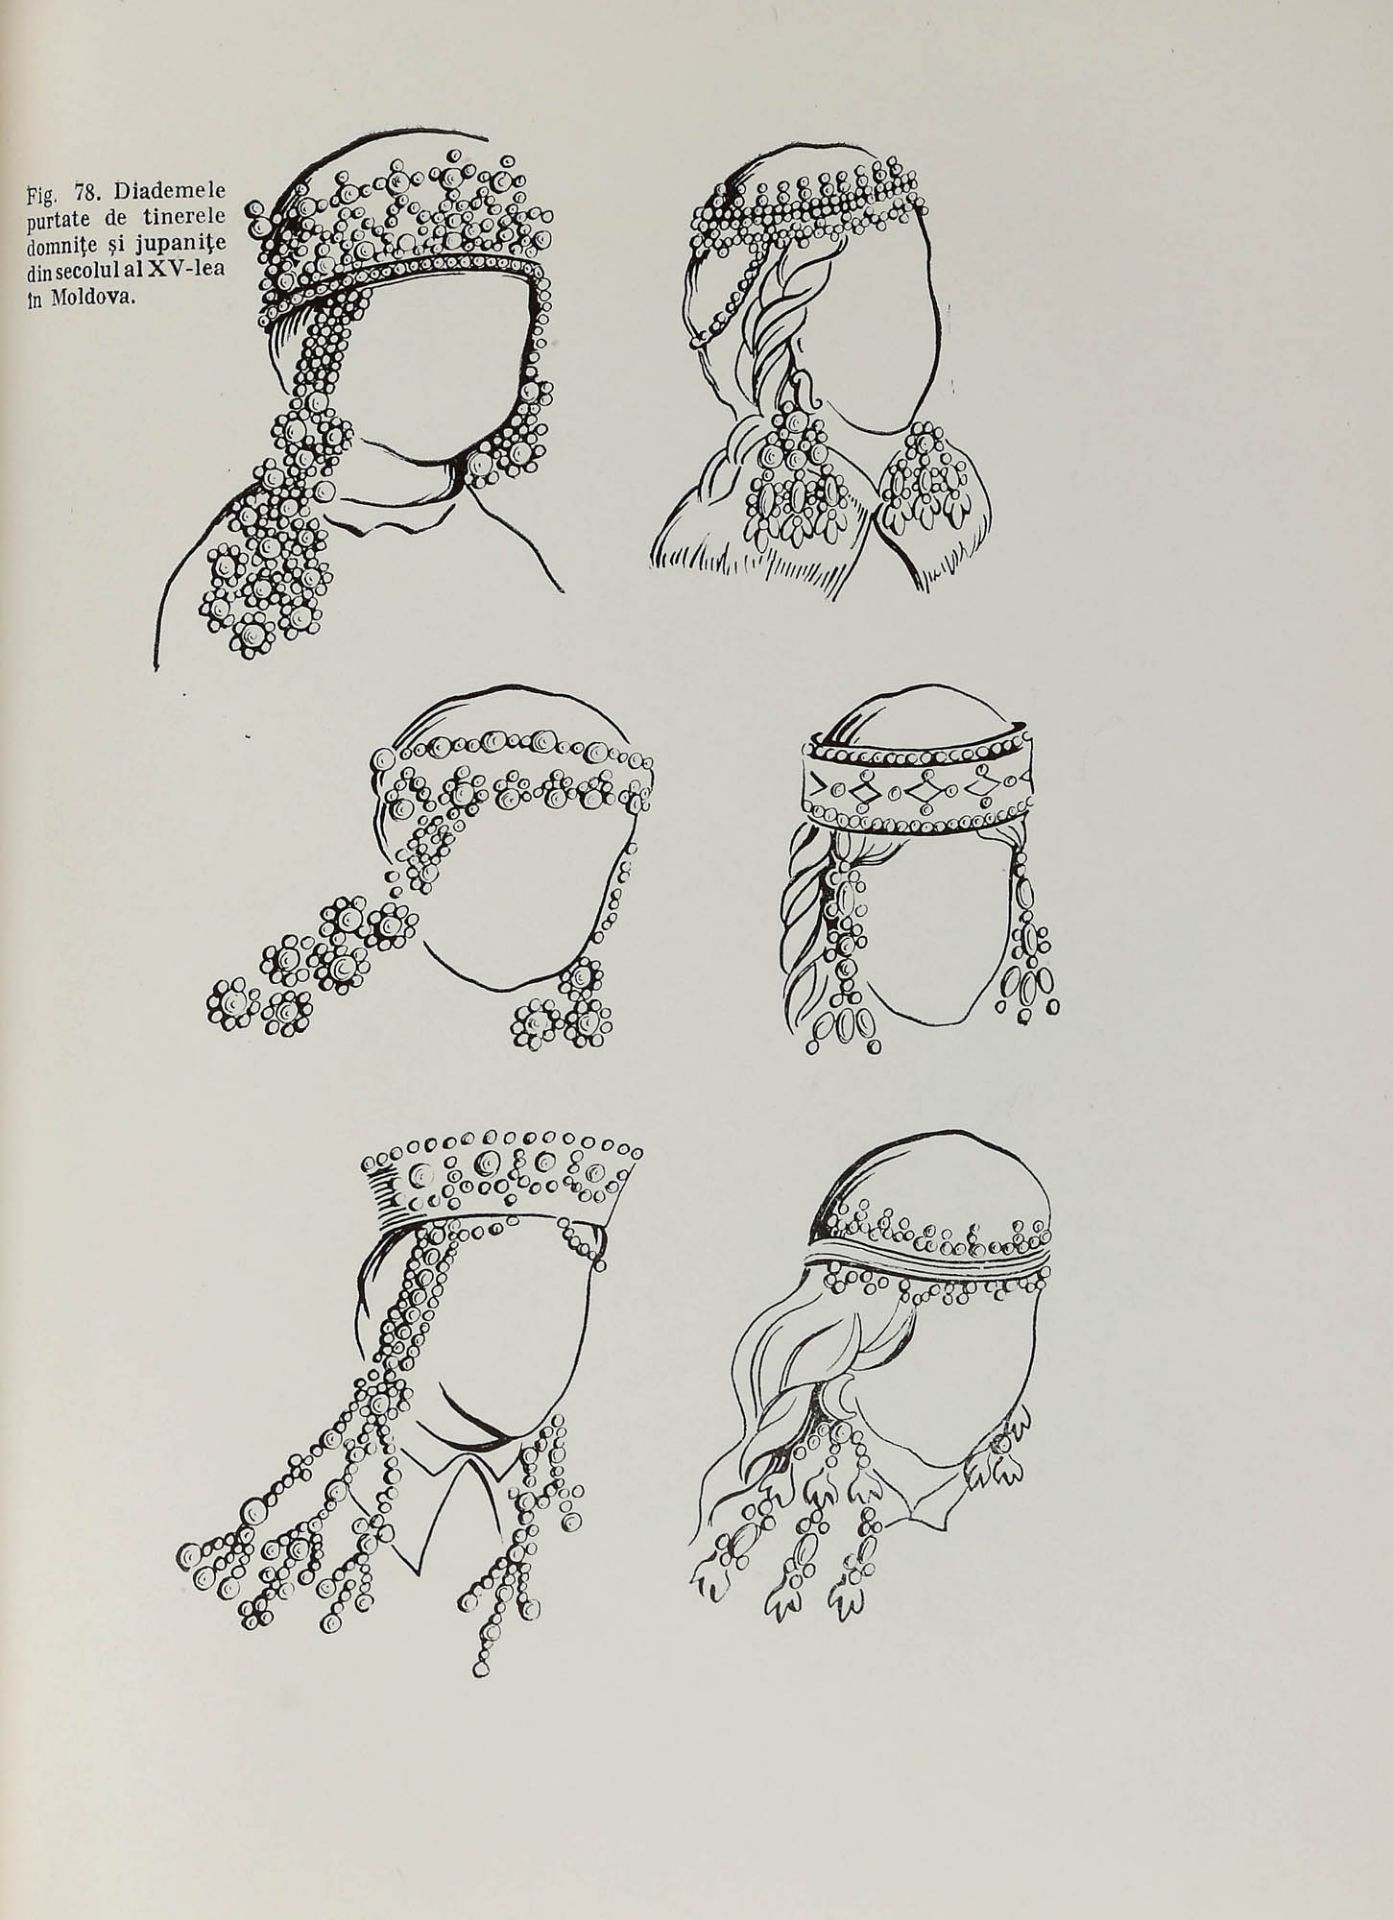 "The history of the court dress in the Romanian Countries", by Corina Nicolescu, Bucharest, 1970 - Image 6 of 6